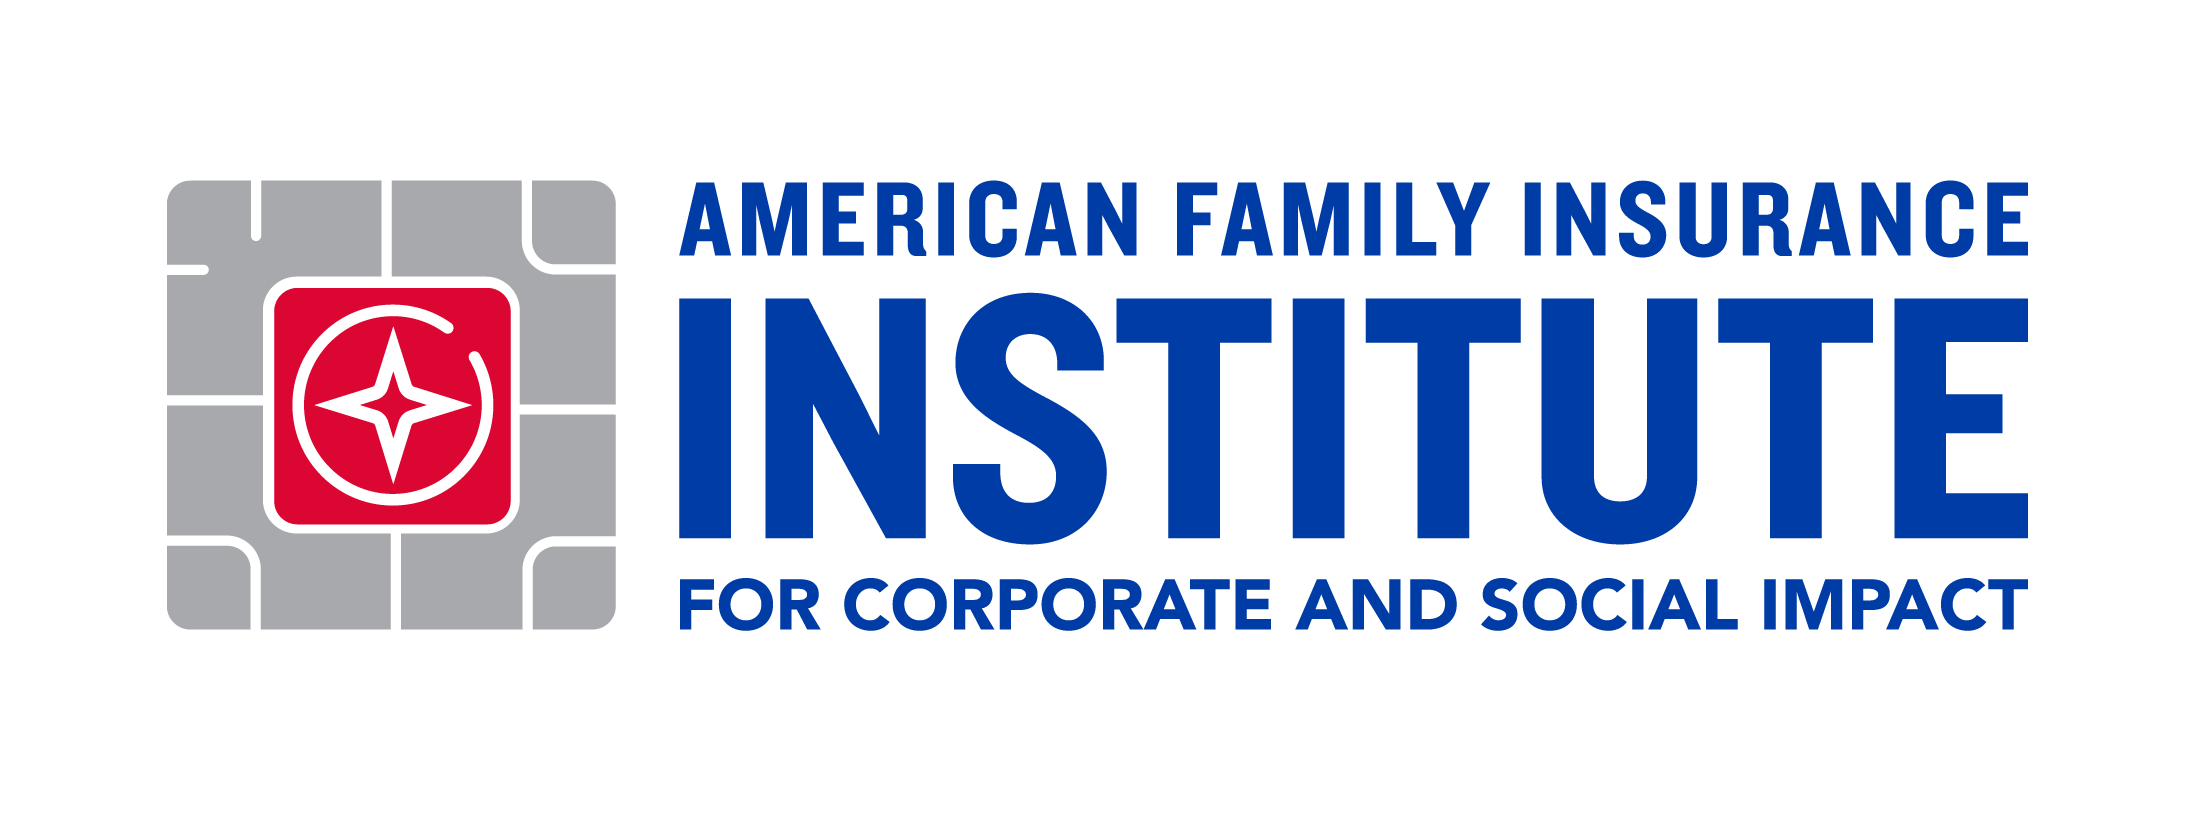 American Family Insurance Institute for Corporate and Social Impact